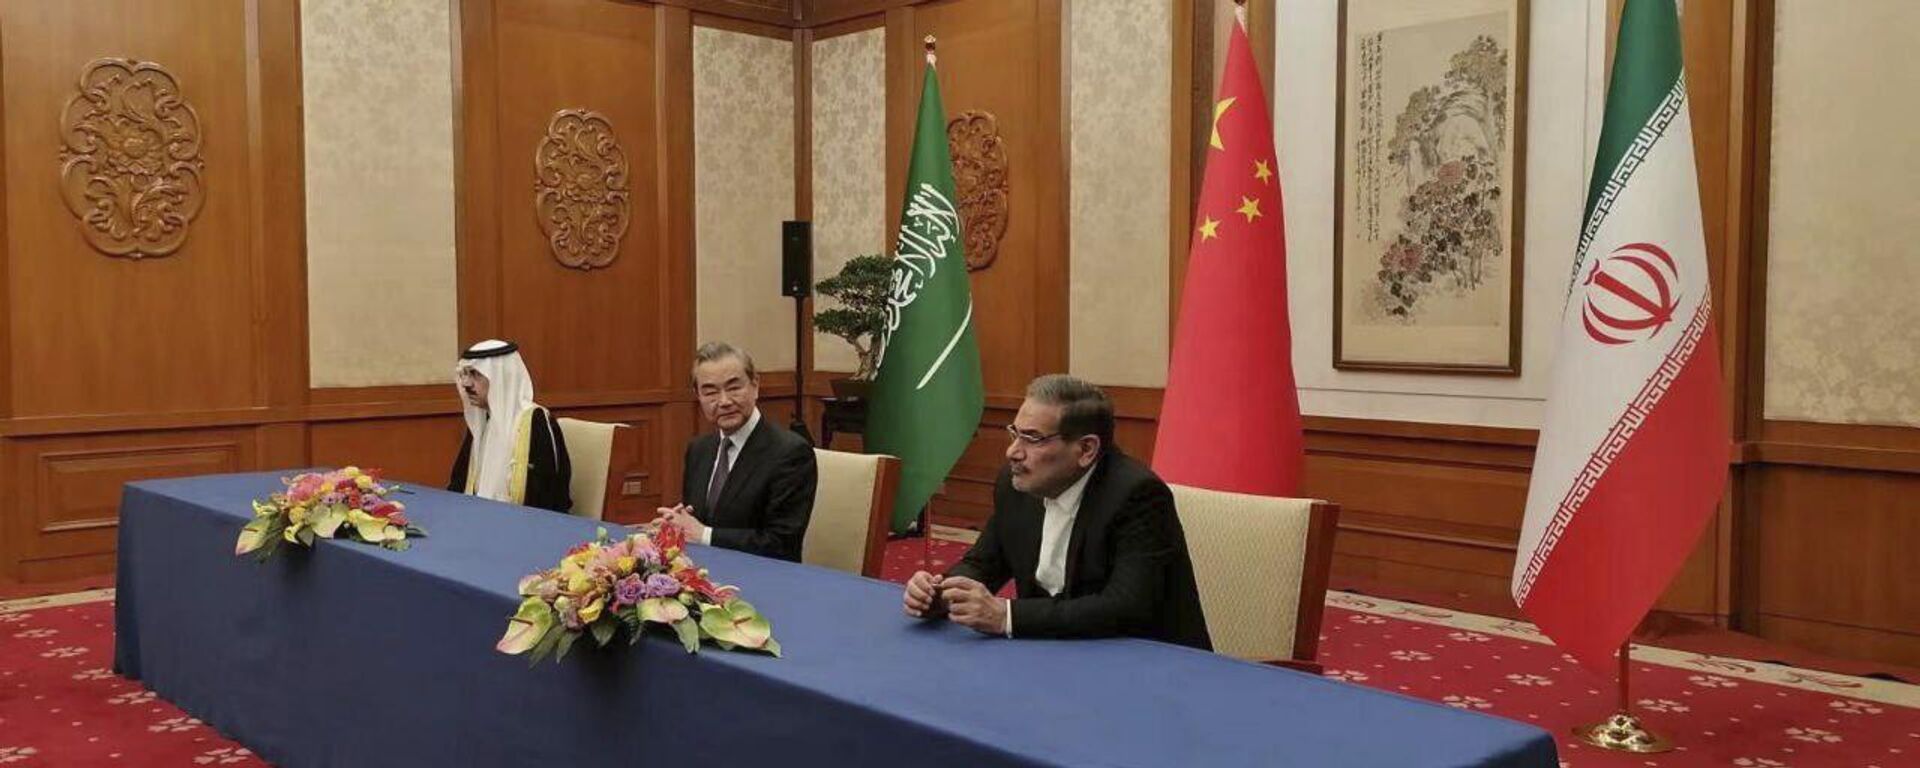 In this photo released by Nournews, Secretary of Iran's Supreme National Security Council, Ali Shamkhani, right, China's most senior diplomat Wang Yi, center, and Saudi Arabia's National Security Adviser Musaad bin Mohammed al-Aiban looks on during an agreement signing ceremony between Iran and Saudi Arabia to reestablish diplomatic relations and reopen embassies after seven years of tensions between the Mideast rivals, in Beijing, China, Friday, March 10, 2023. - Sputnik International, 1920, 11.03.2023